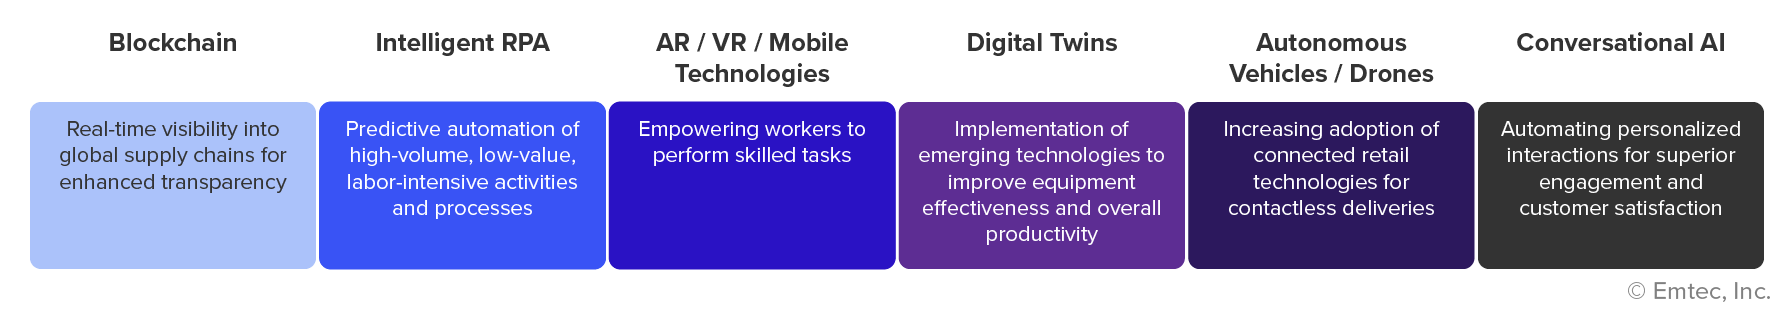 existing-technology-capabilities